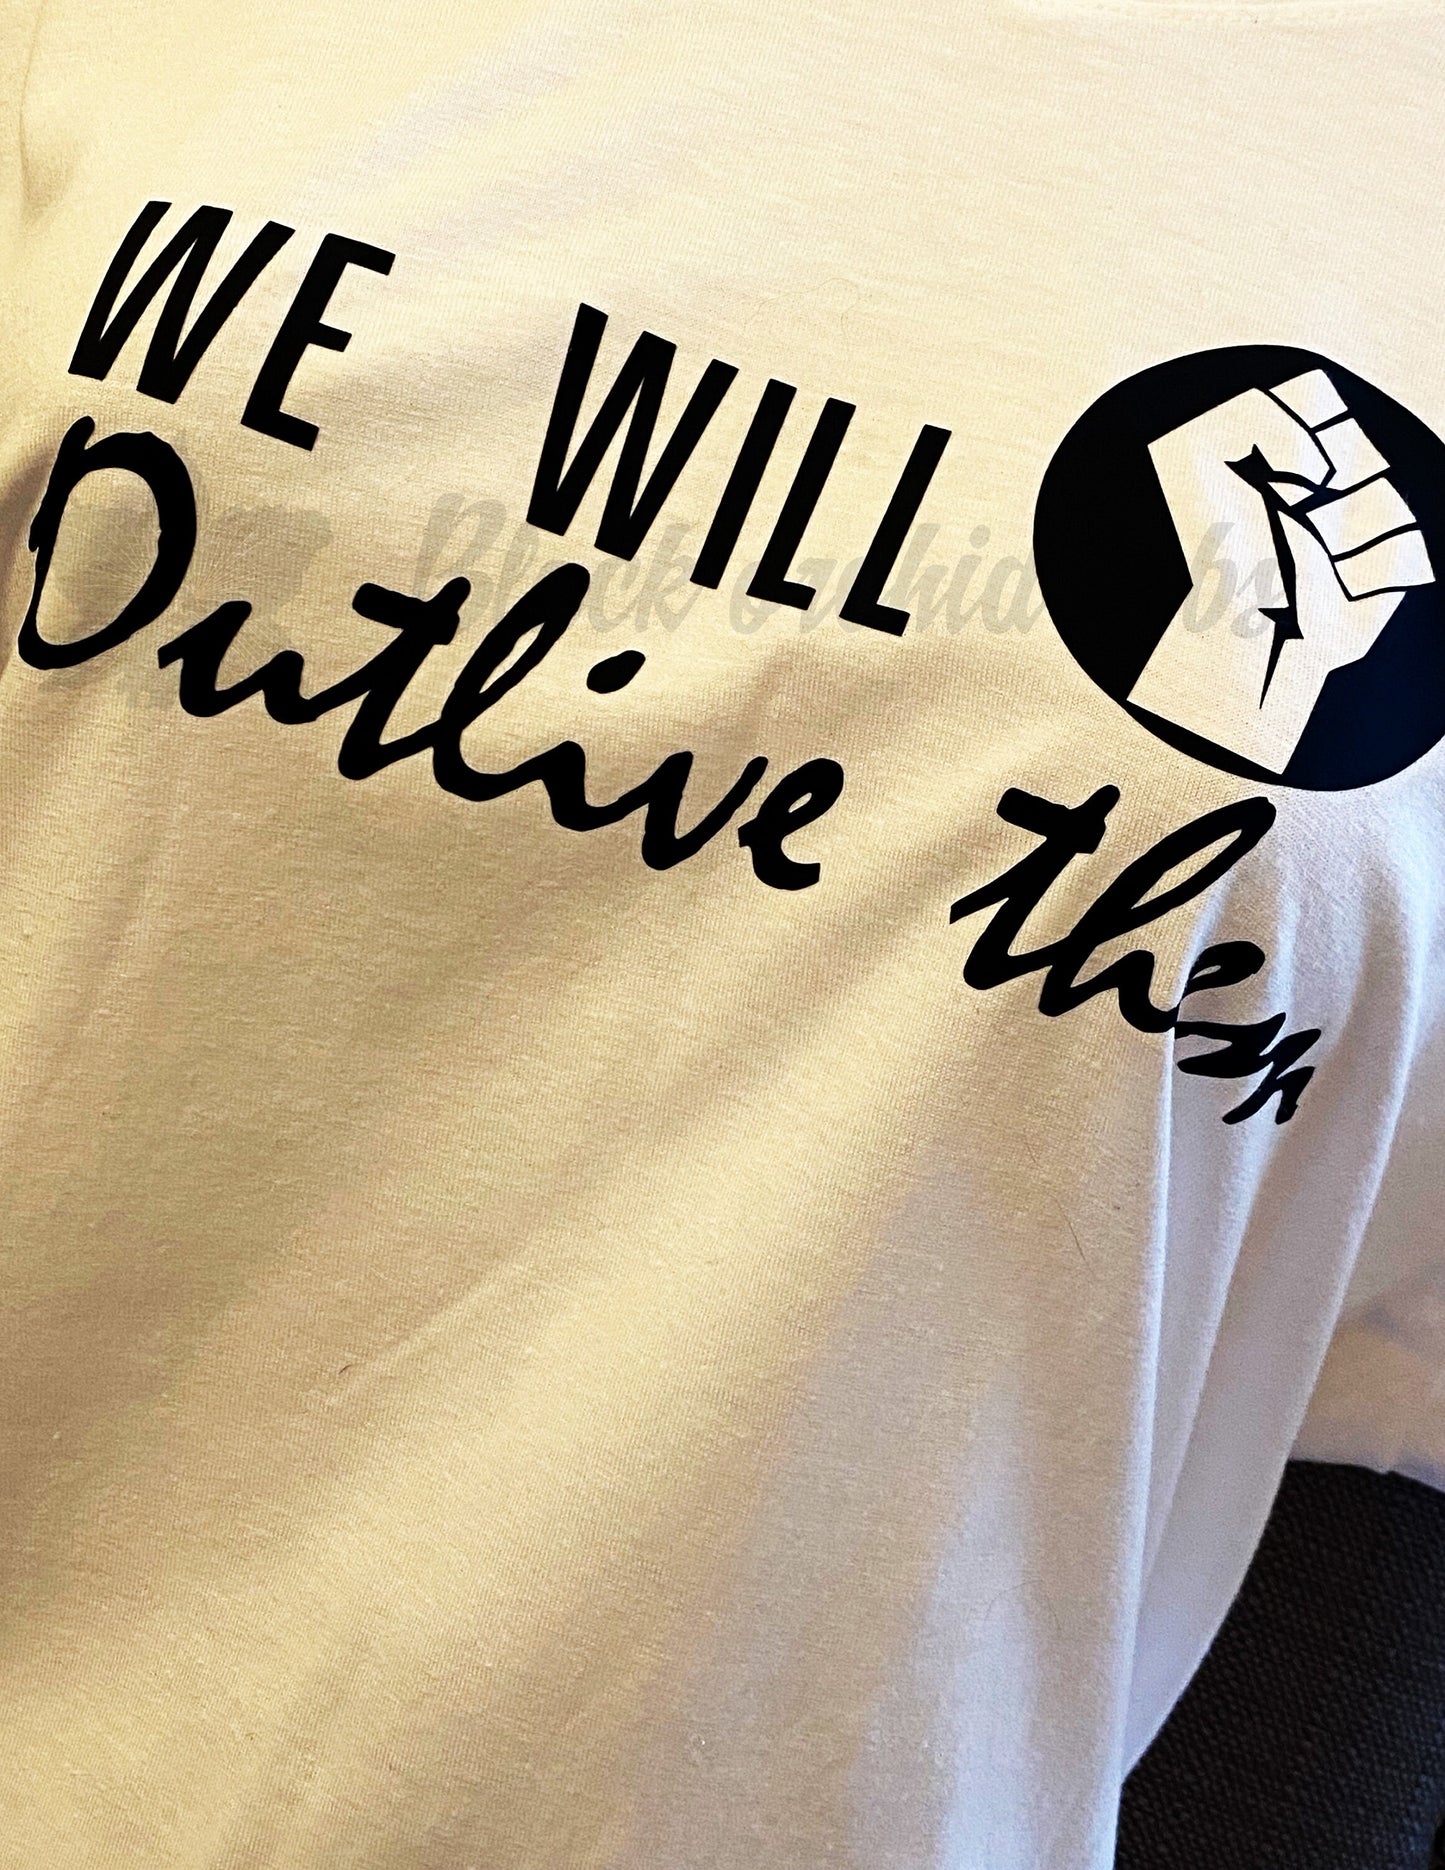 We Will Outlive Them Tote, T-shirt, Hoodie, or Tank, Empowerment, March Shirt, Protest Shirt, Positive Message, Survivor Shirt, Anti-Racist